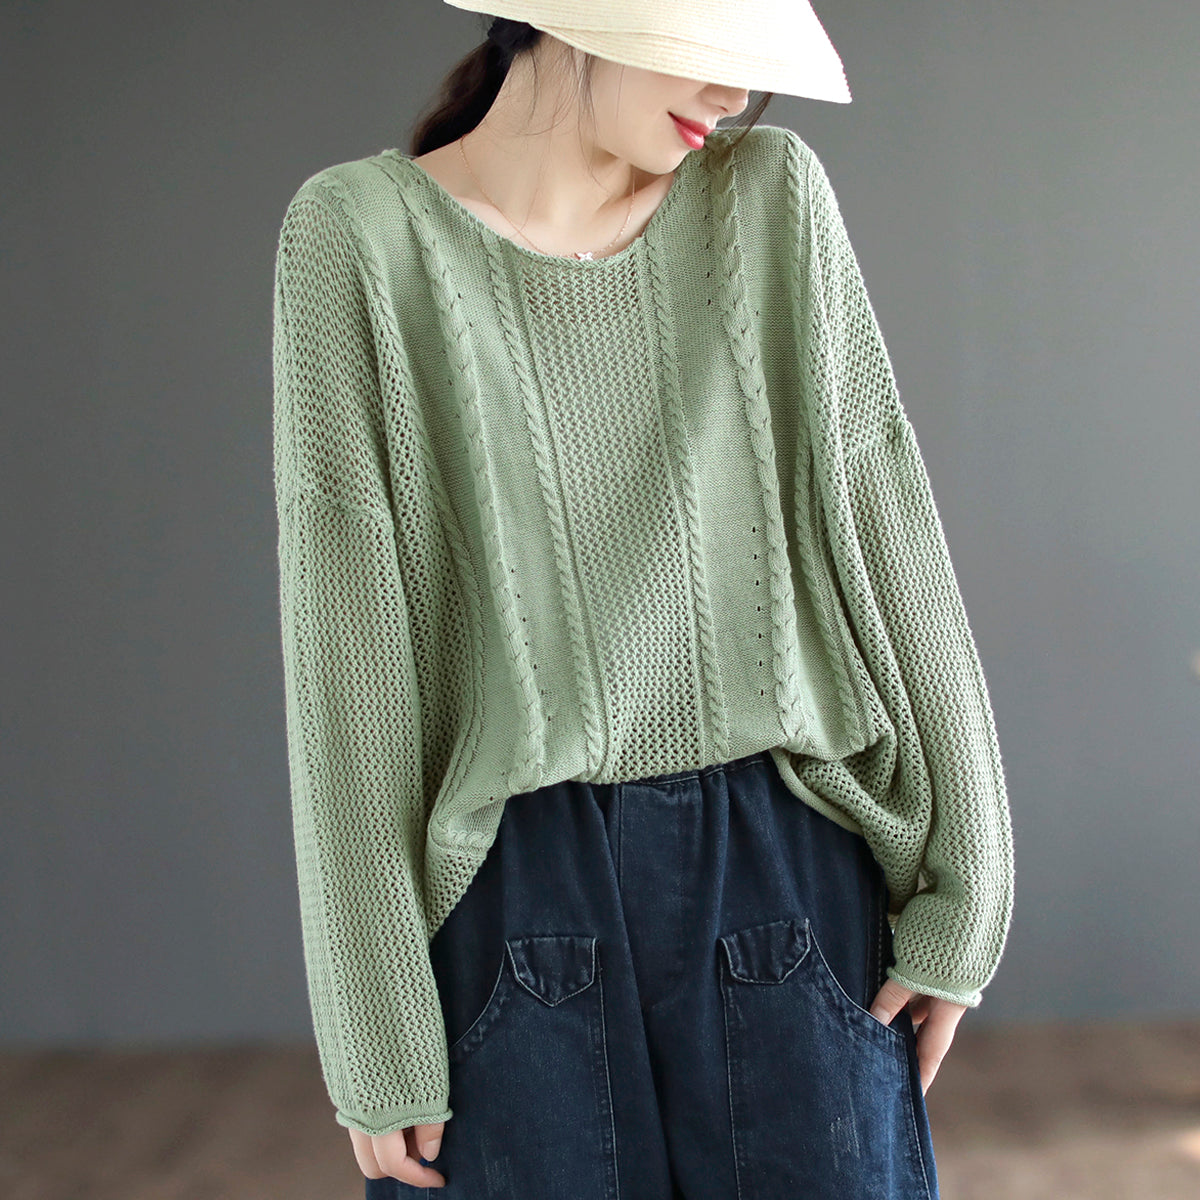 Women Retro Loose Cotton Knitted Sweater Plus Size Aug 2022 New Arrival One Size Green 